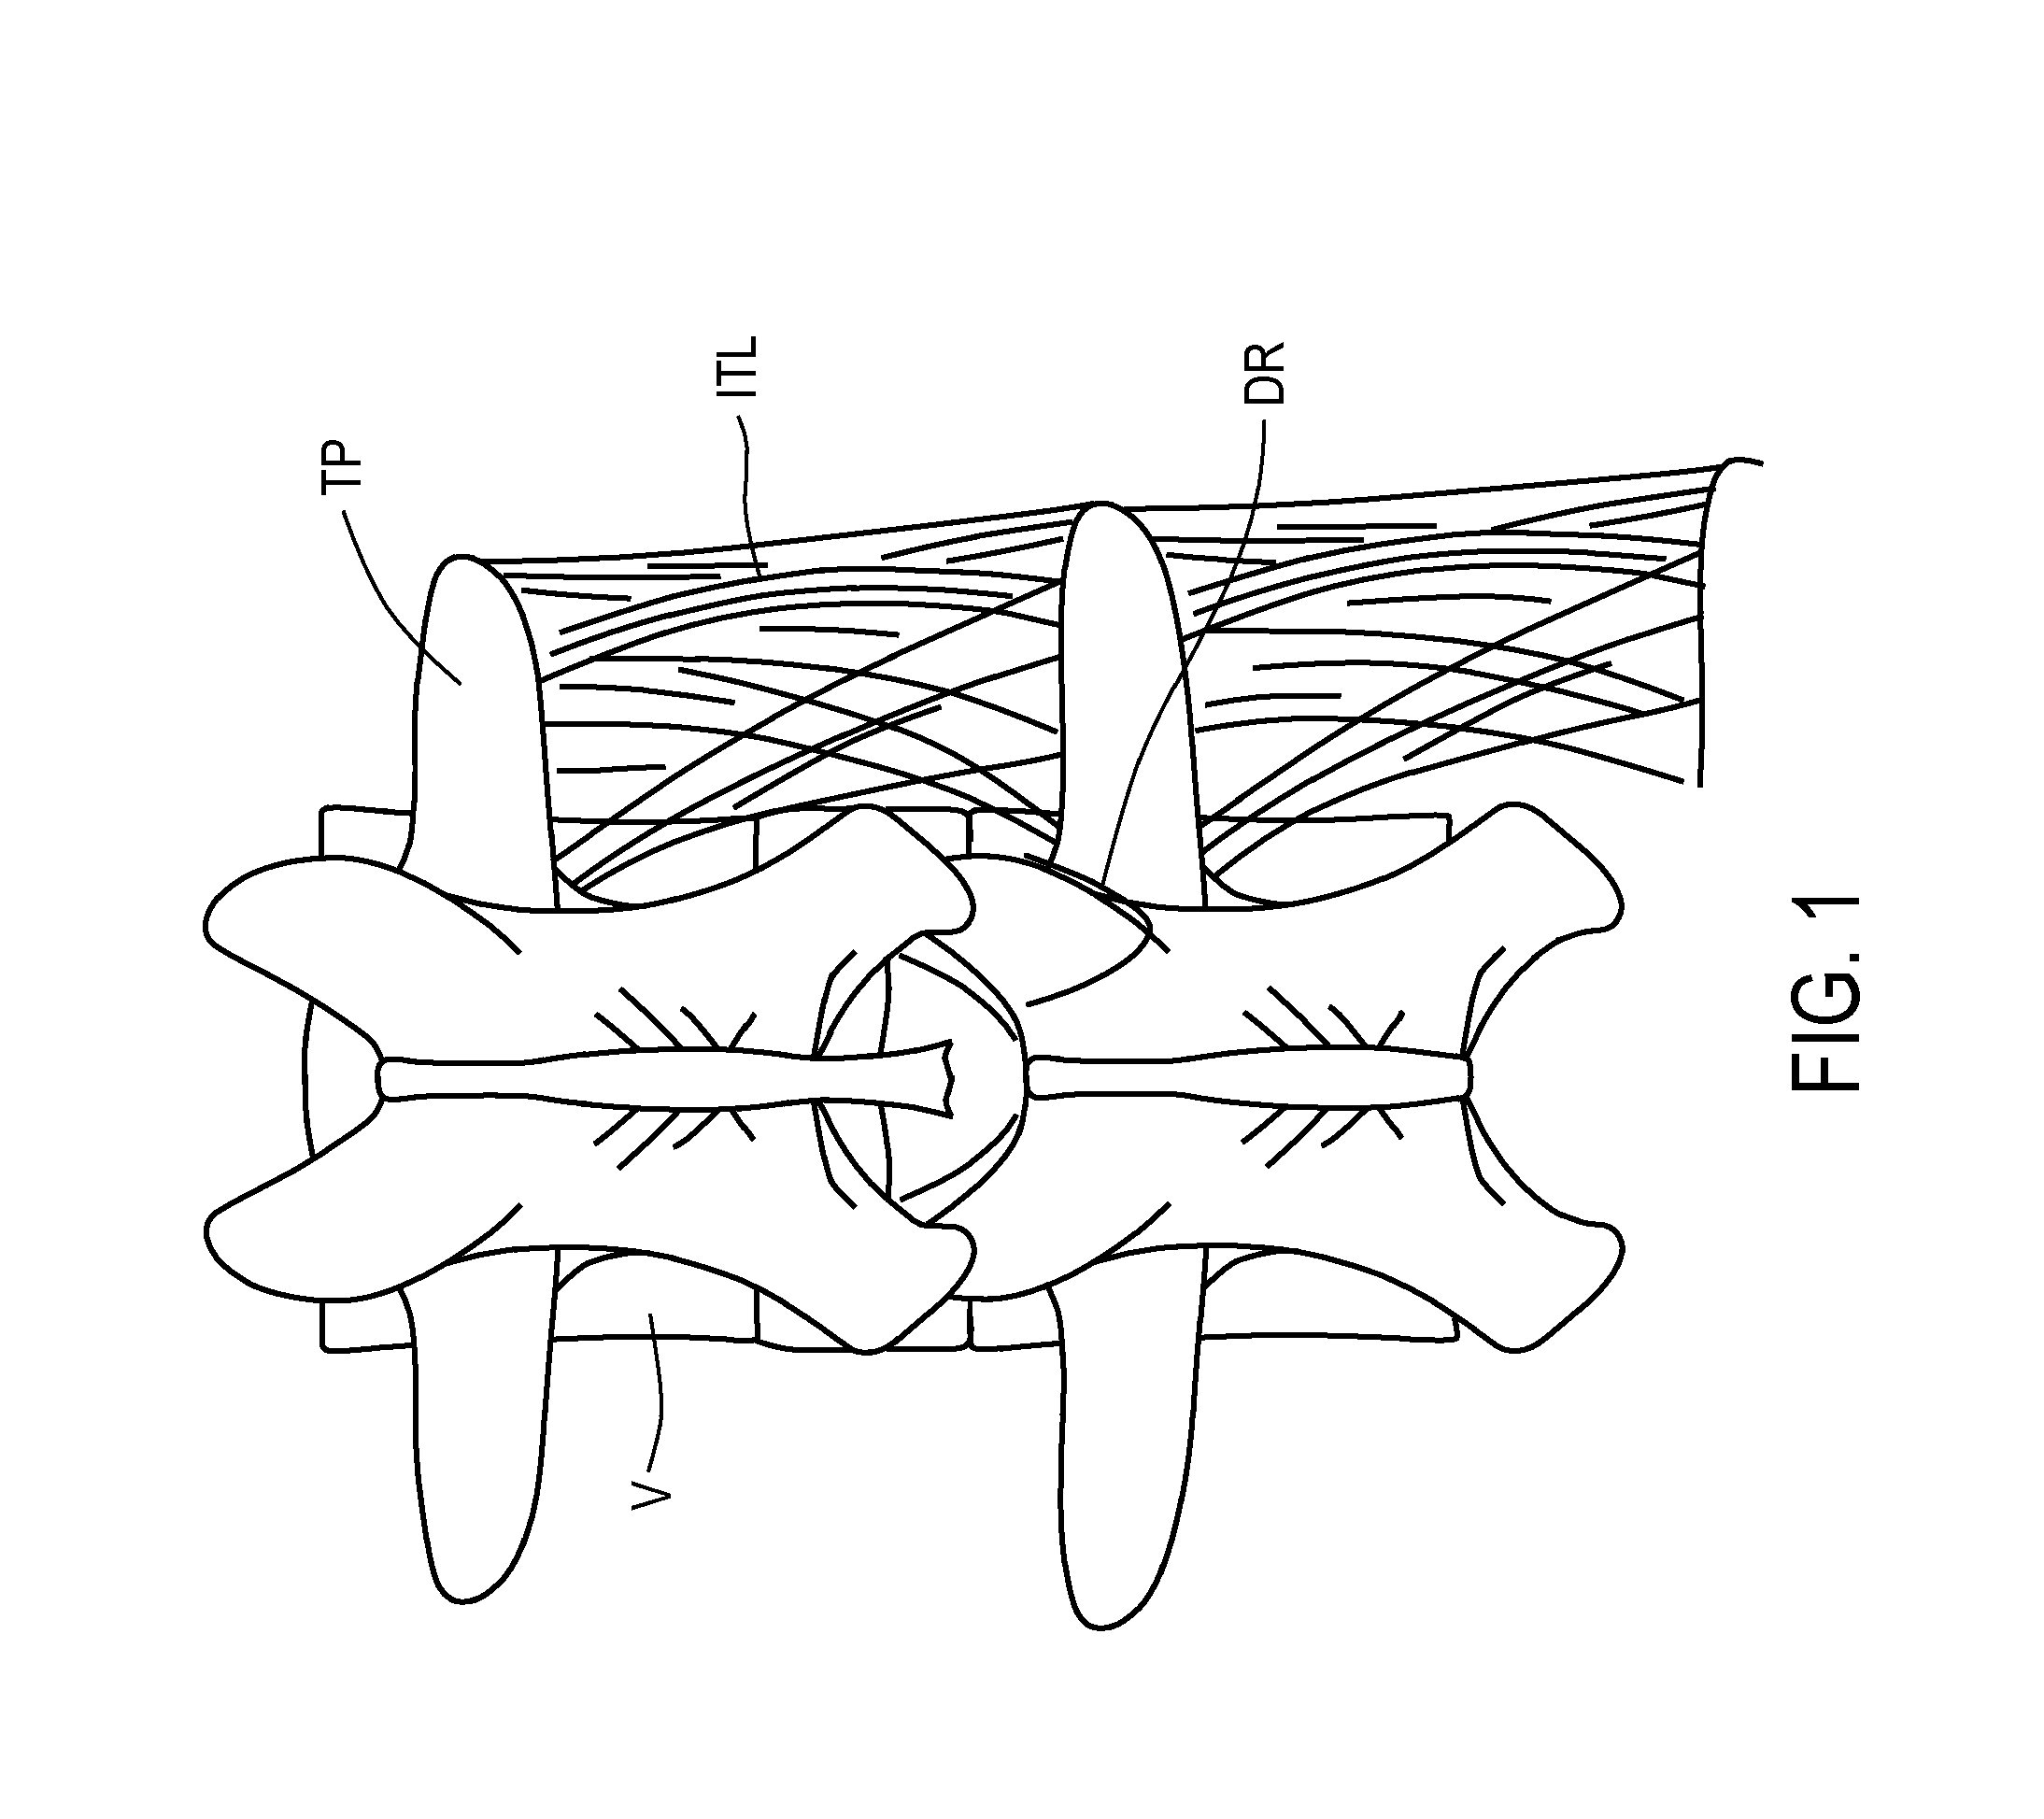 Apparatus and methods for anchoring electrode leads adjacent to nervous tissue